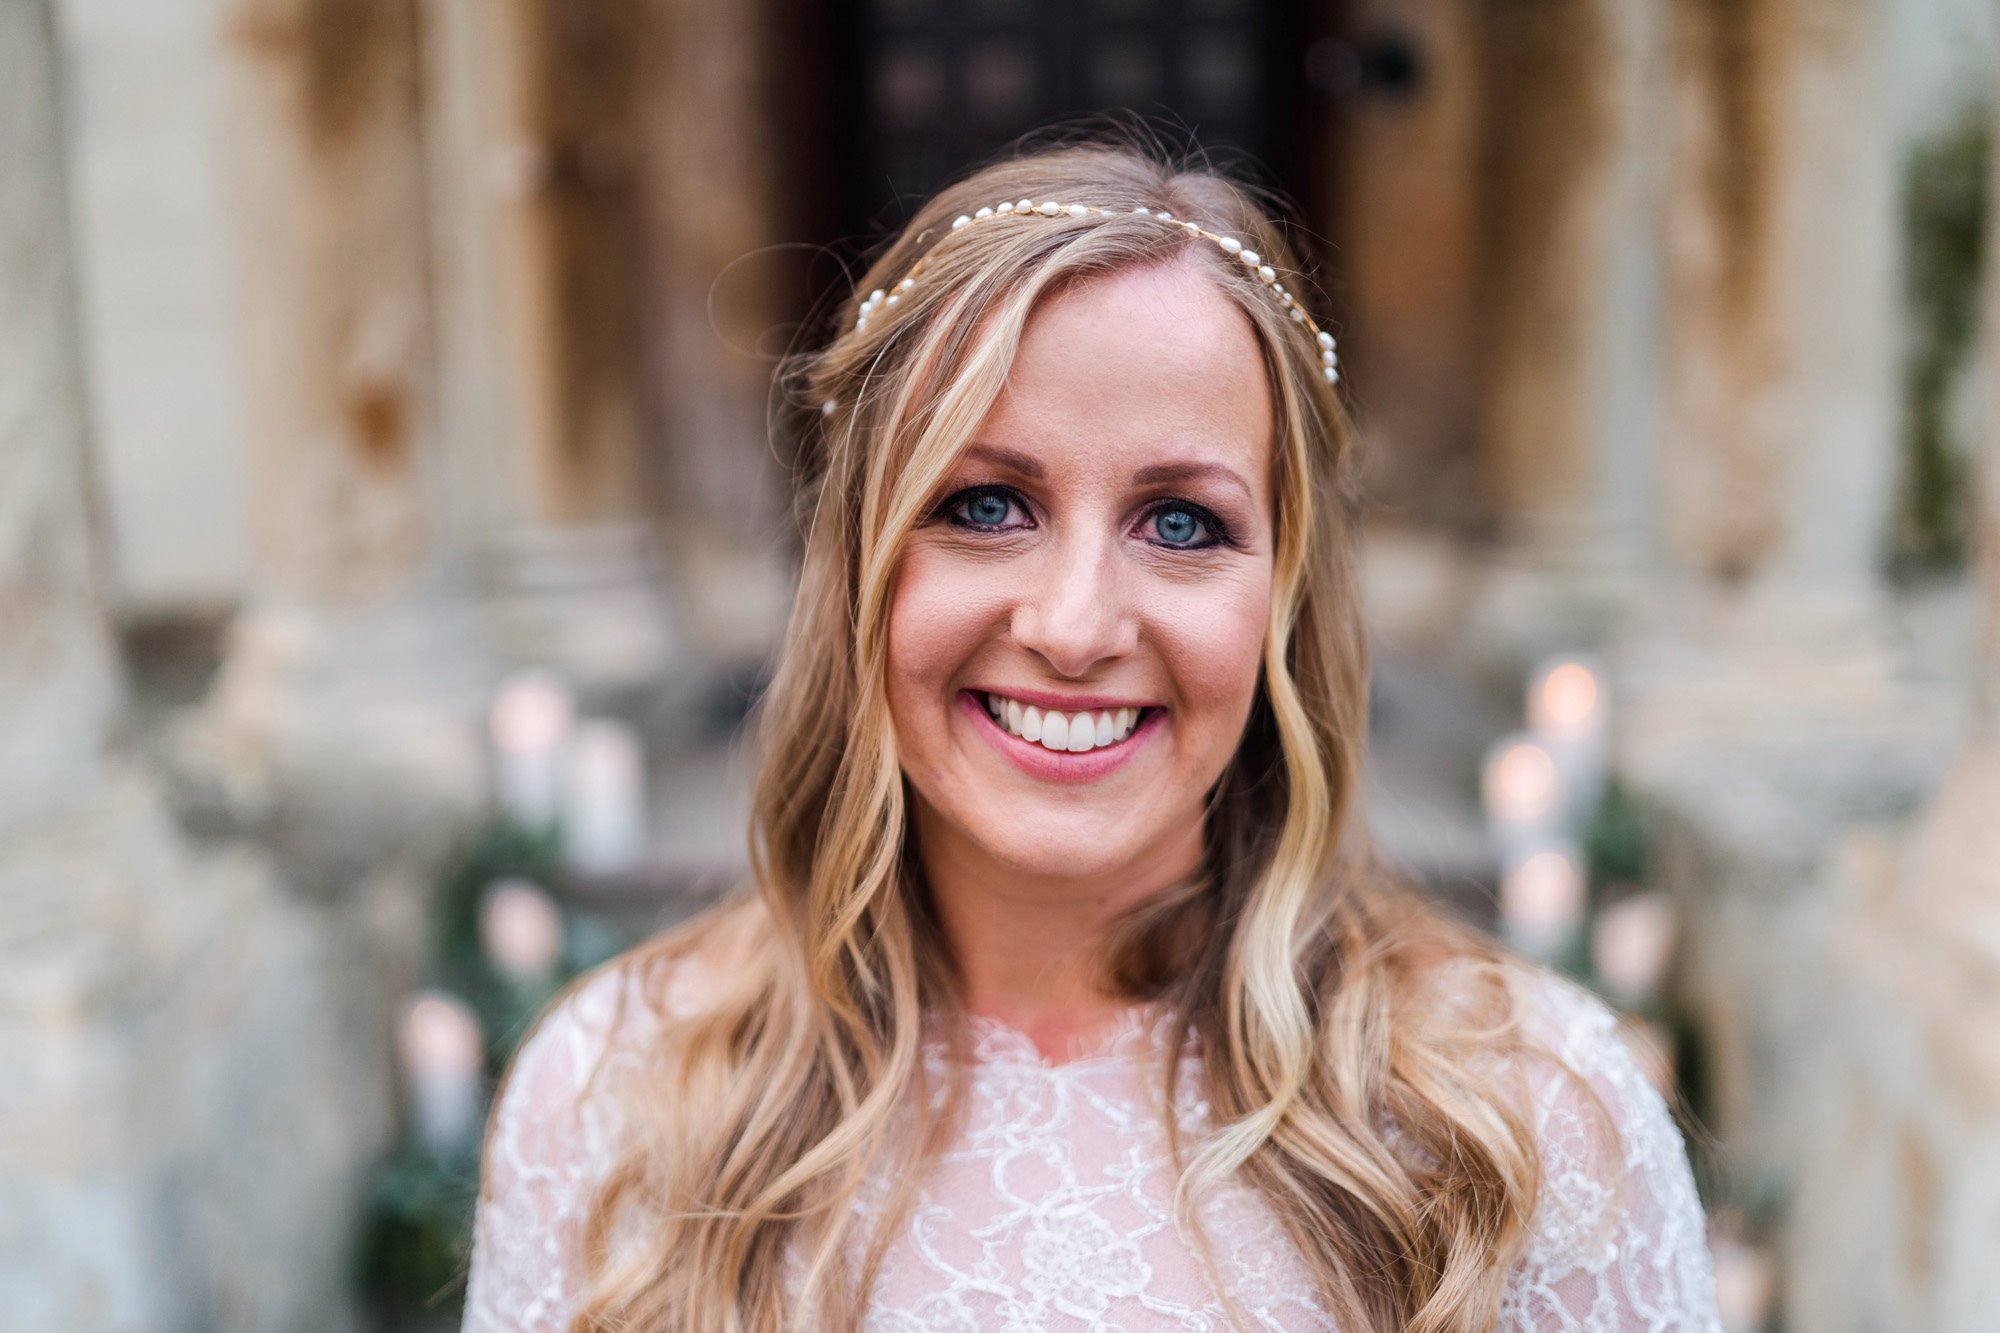 Blonde bride smiles at camera wearings simple pearl bridal headpiece and lace bodice dress on steps of stately home in cotswolds